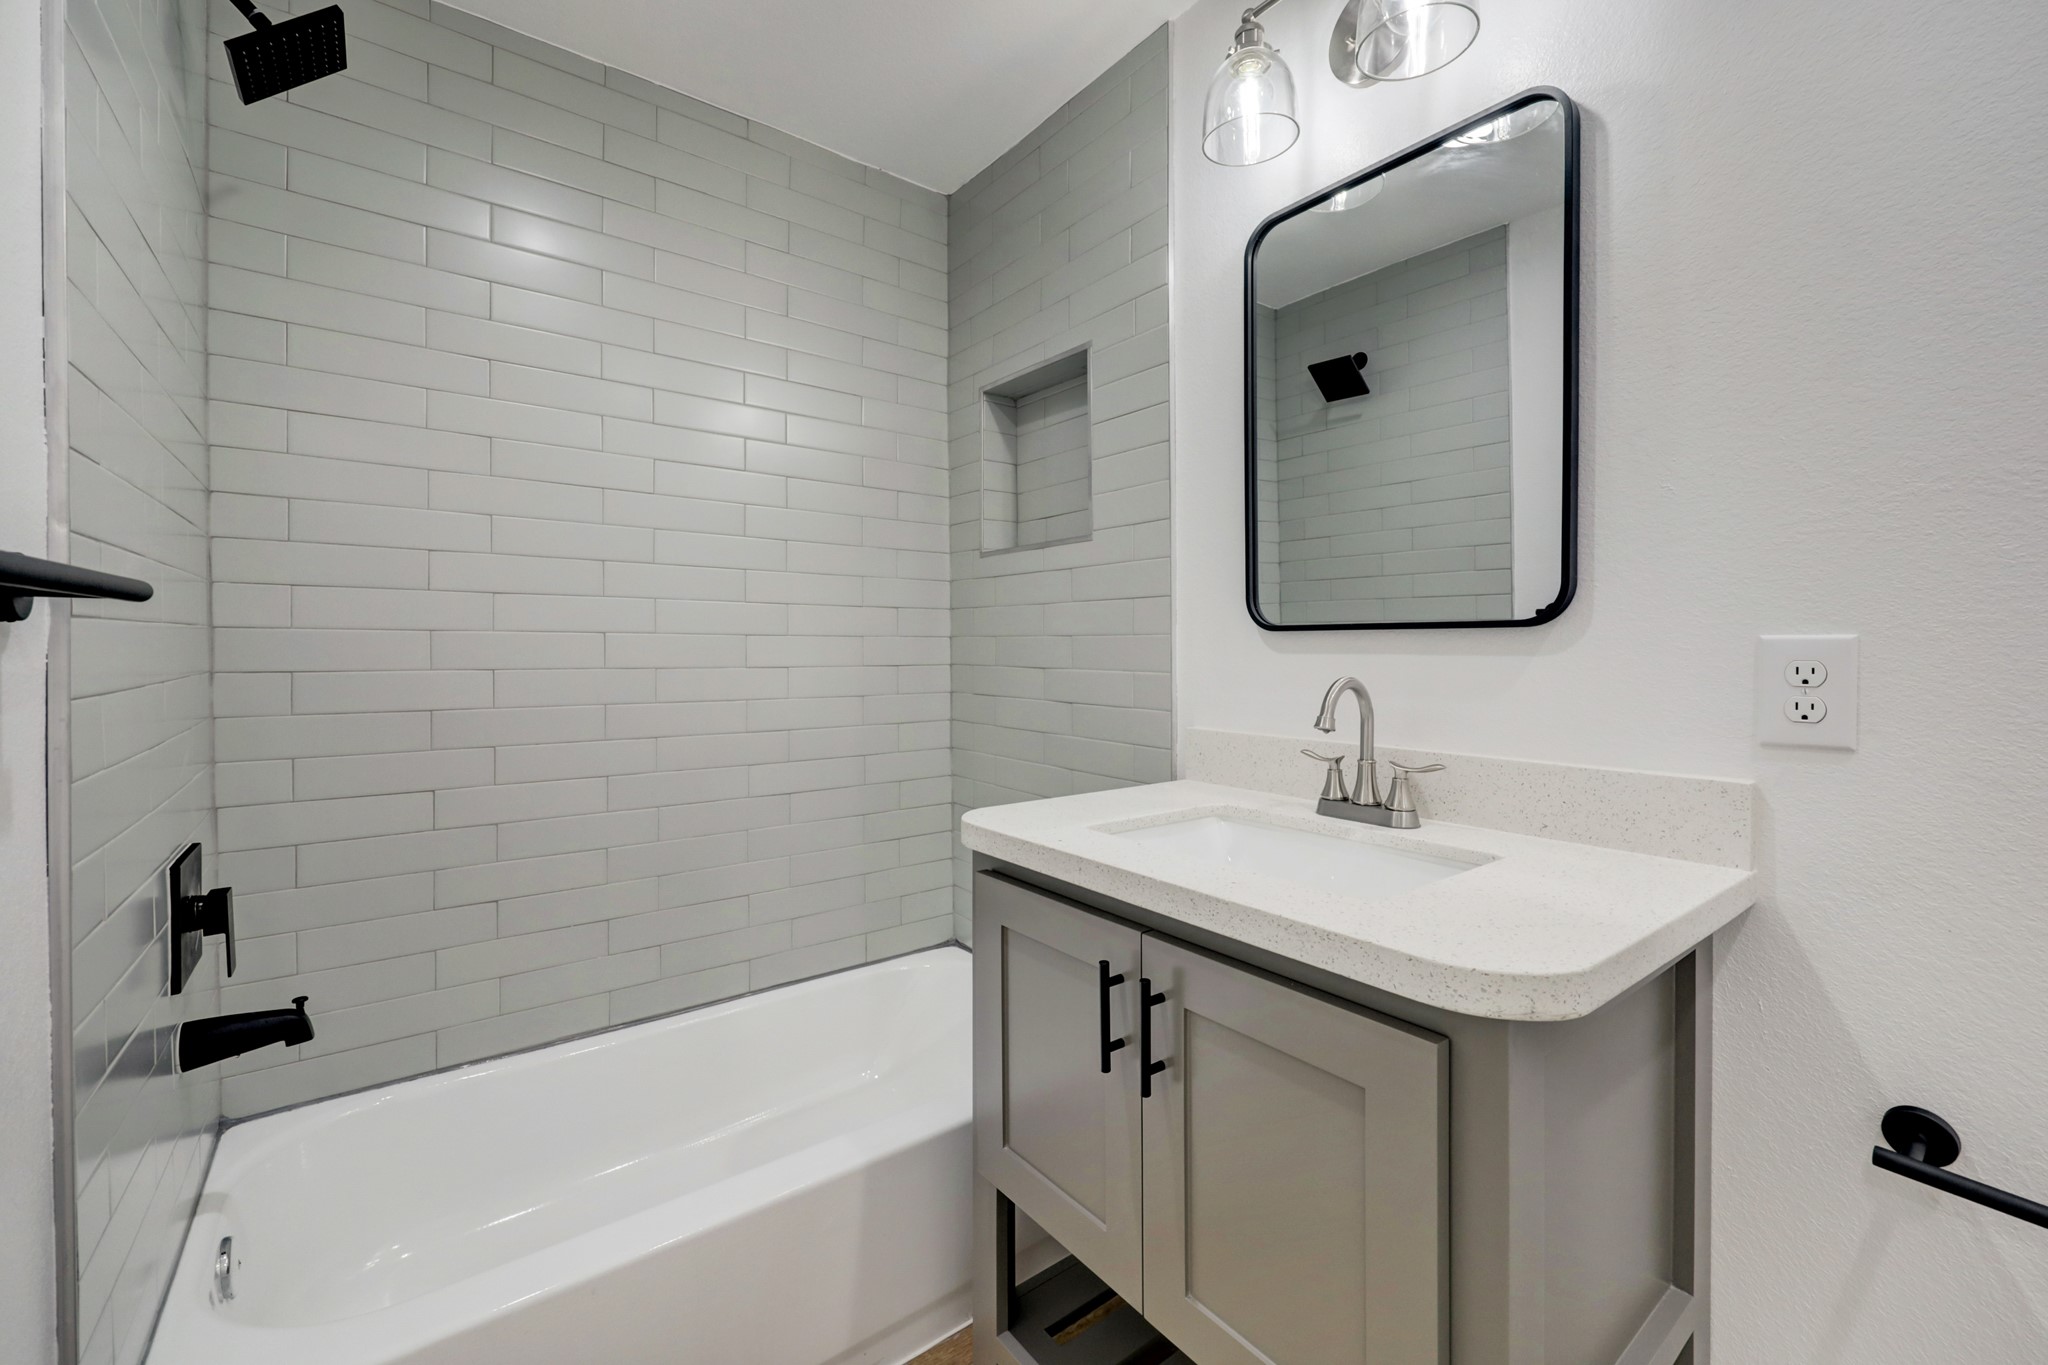 The secondary bathroom is located upstairs and offers a tub/shower combo.